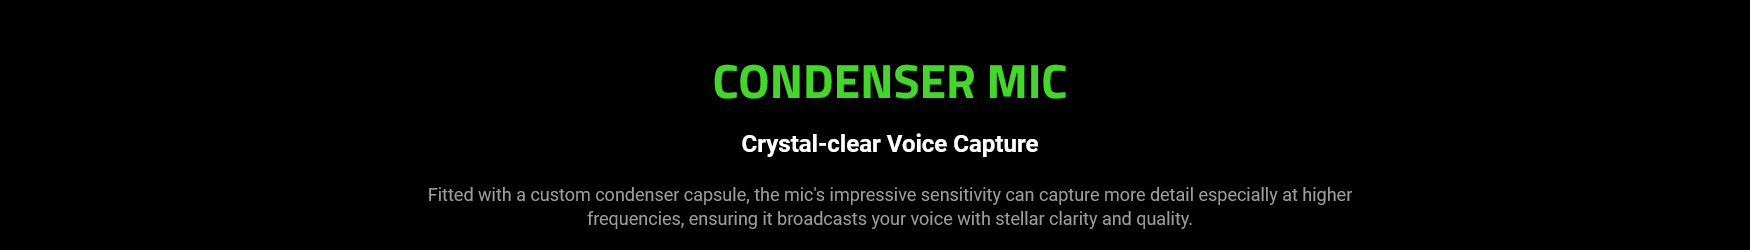 A large marketing image providing additional information about the product Razer Seiren V3 Mini - Ultra-Compact USB Microphone (White) - Additional alt info not provided